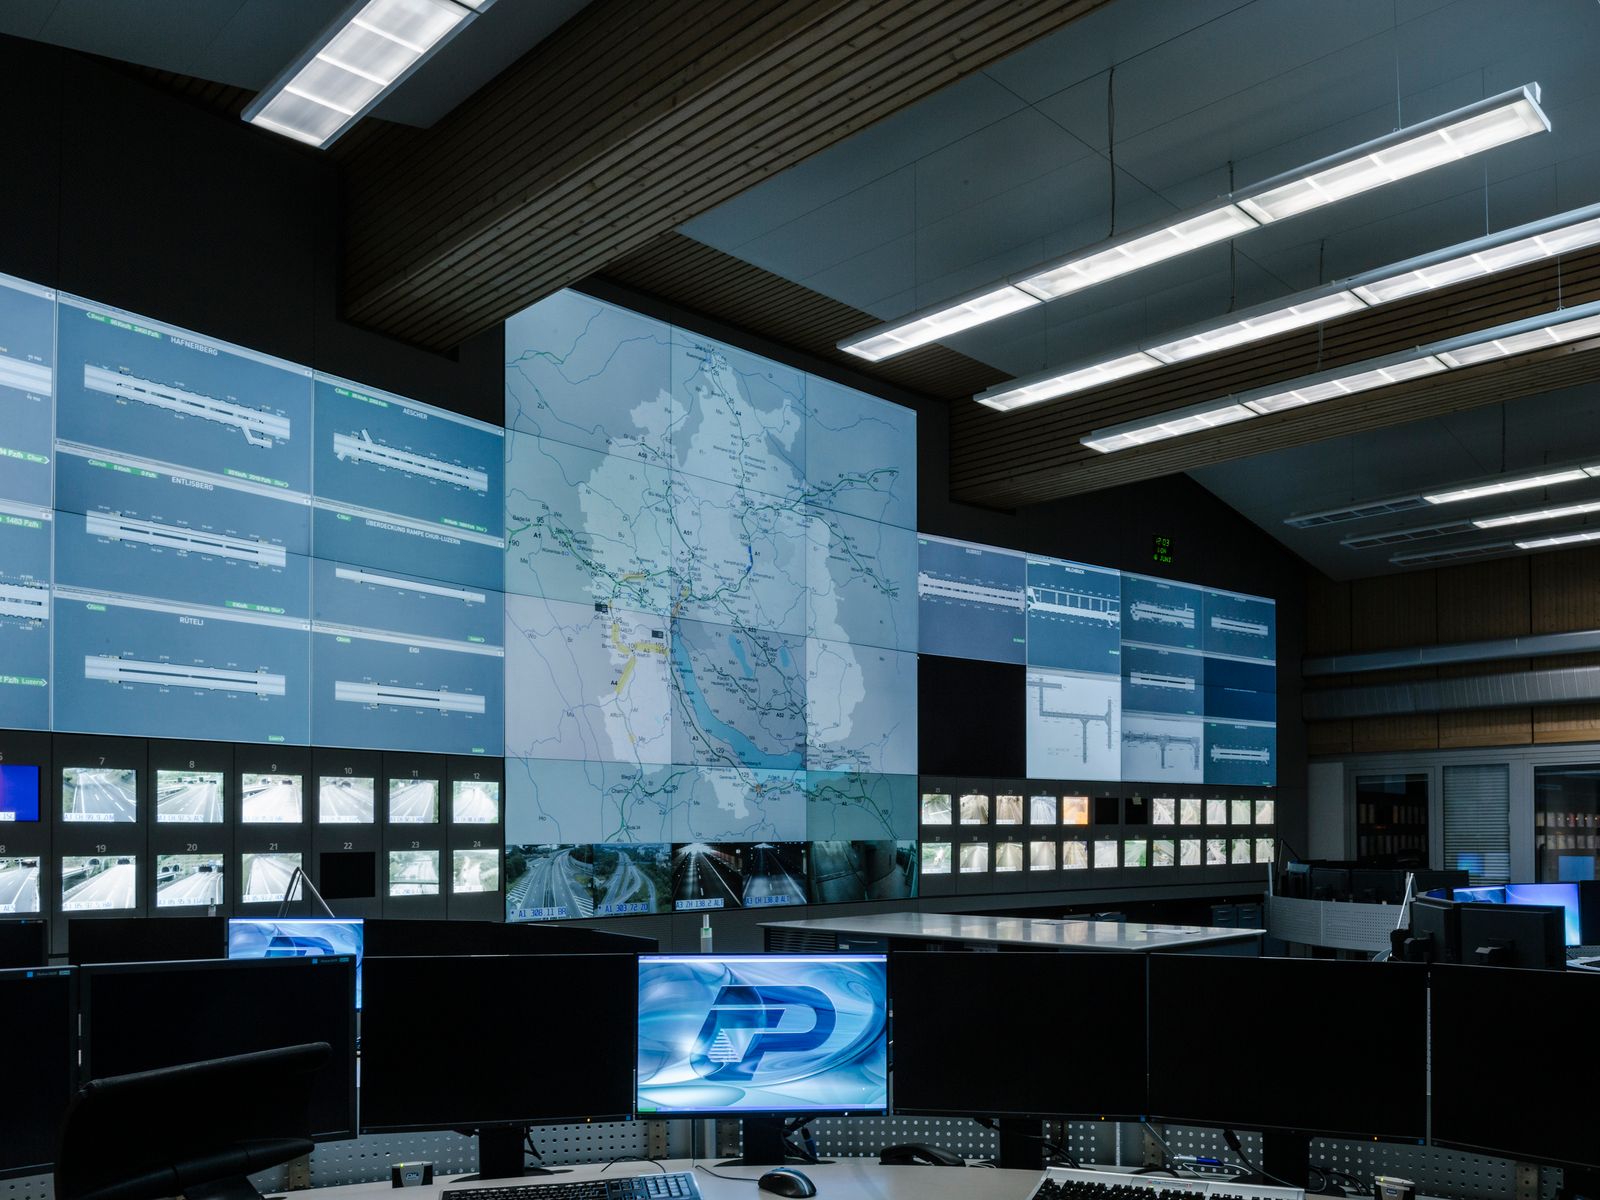 © Salvatore Vitale - Control room at the operation center for monitoring the Swiss highway in Zürich.